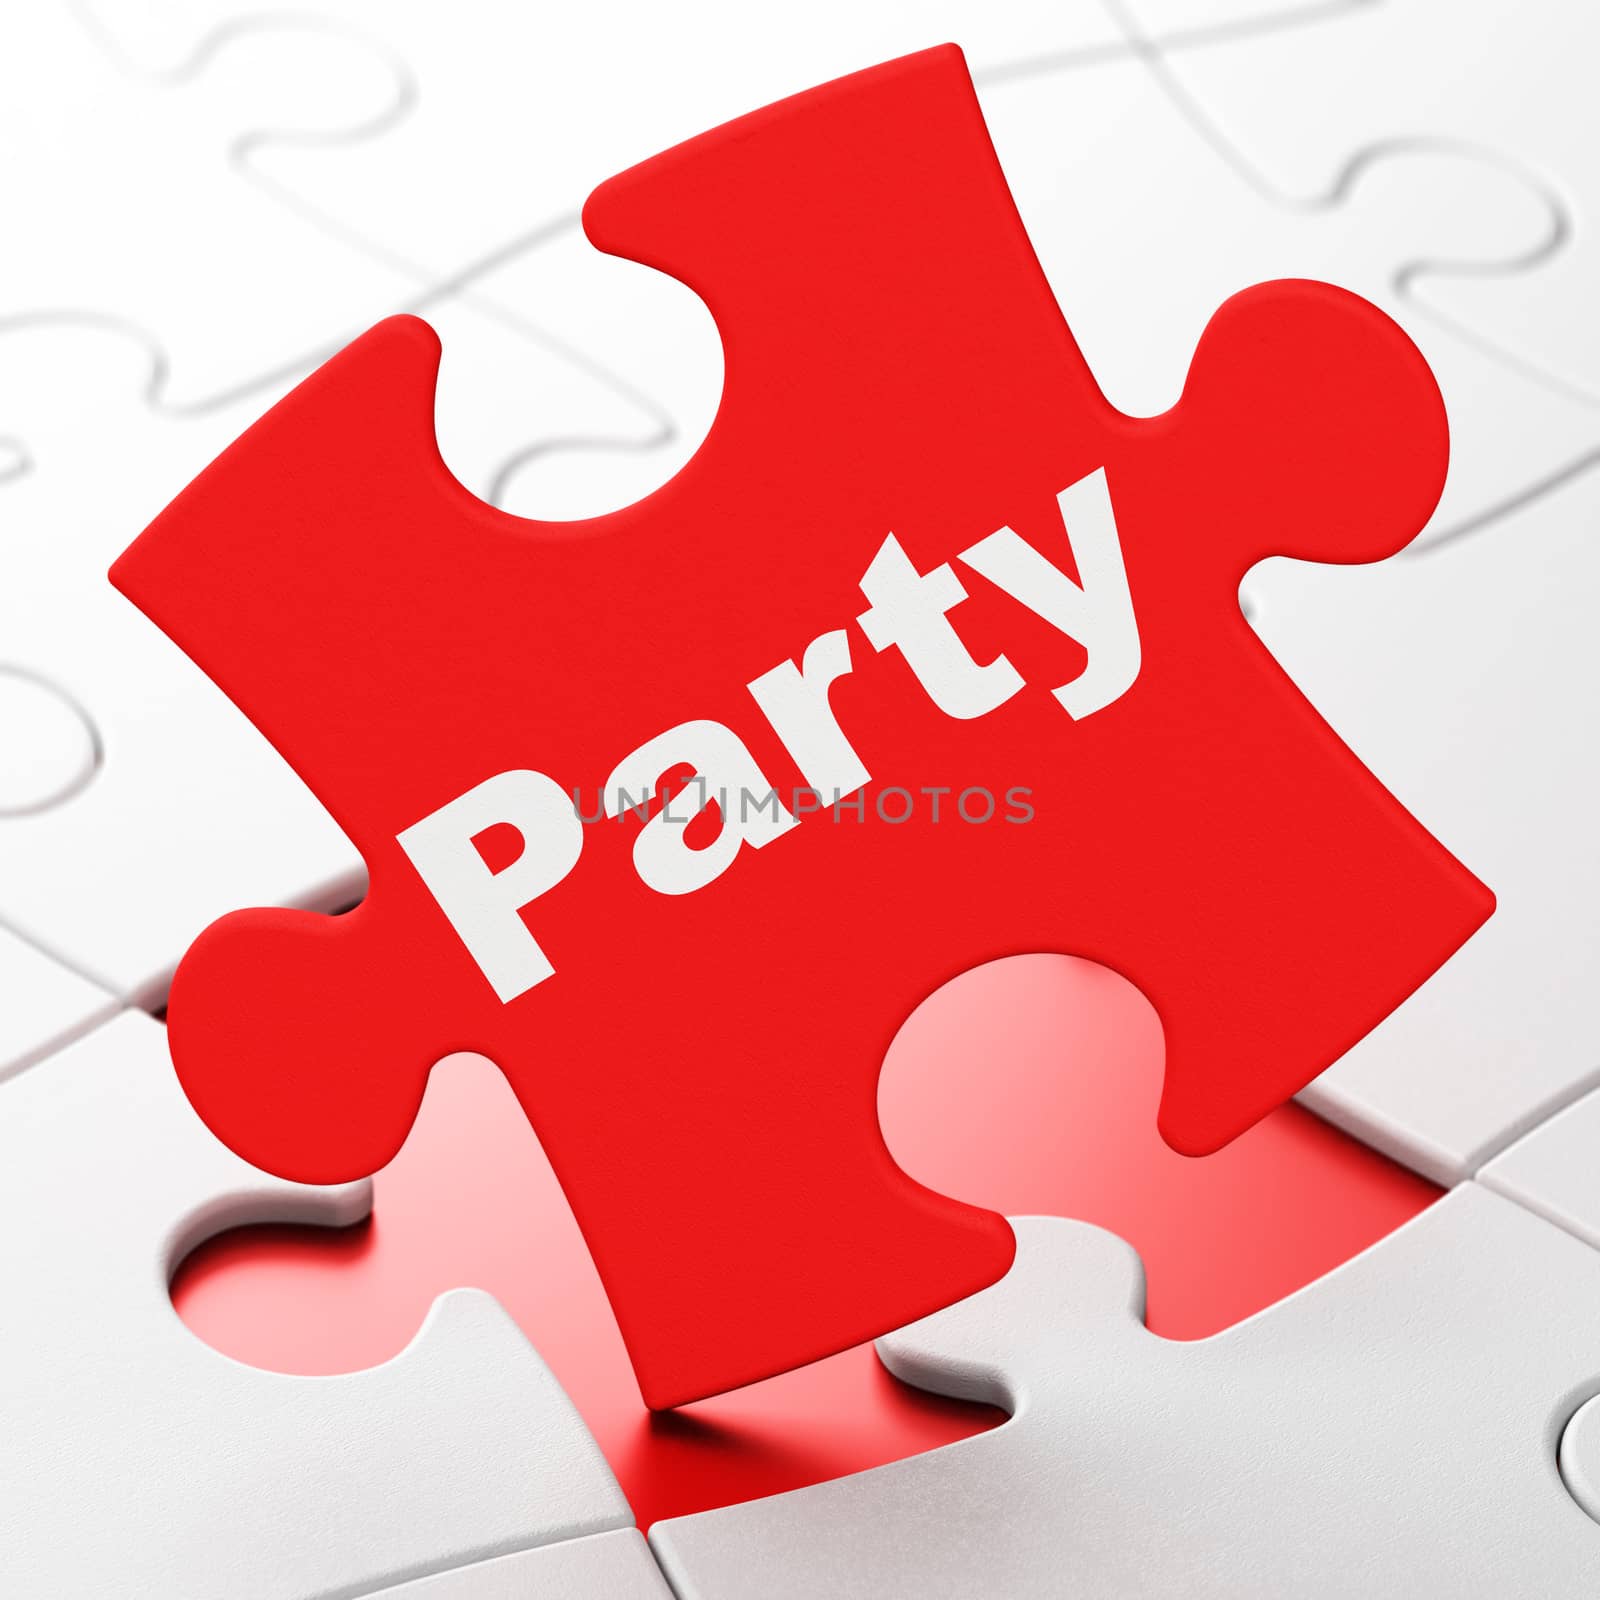 Holiday concept: Party on Red puzzle pieces background, 3D rendering